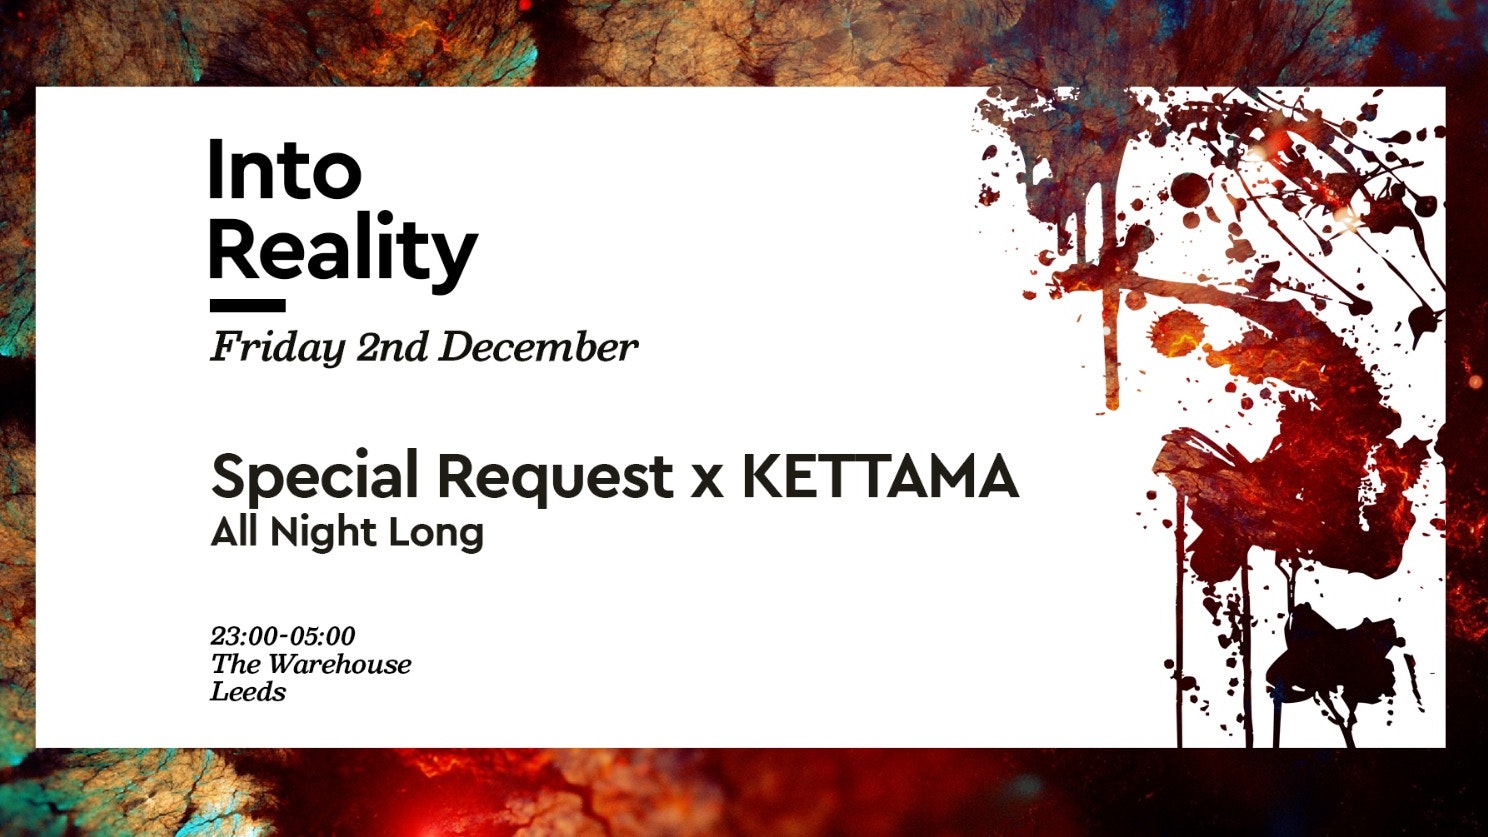 Into Reality: Special Request x KETTAMA – Final 20 Tickets